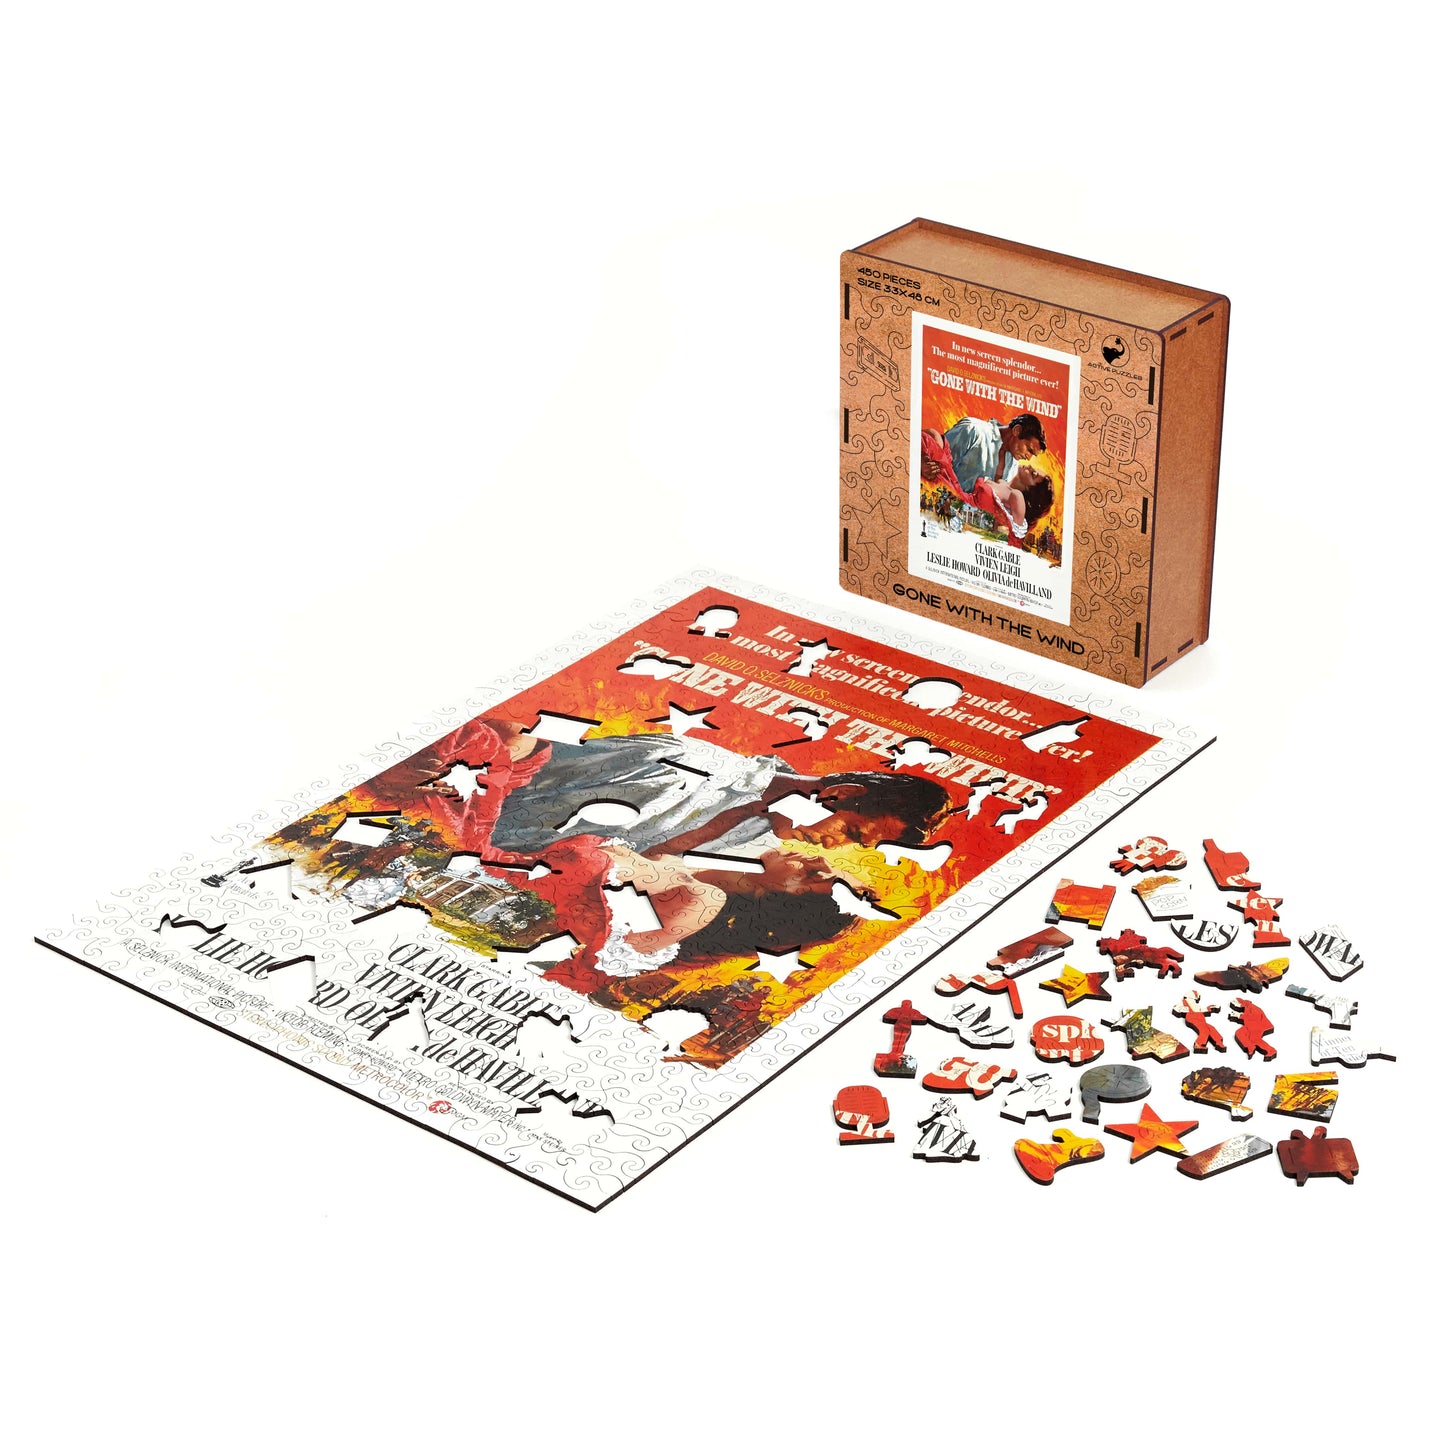 Gone with the Wind Film Poster Wooden Puzzle Active Puzzles